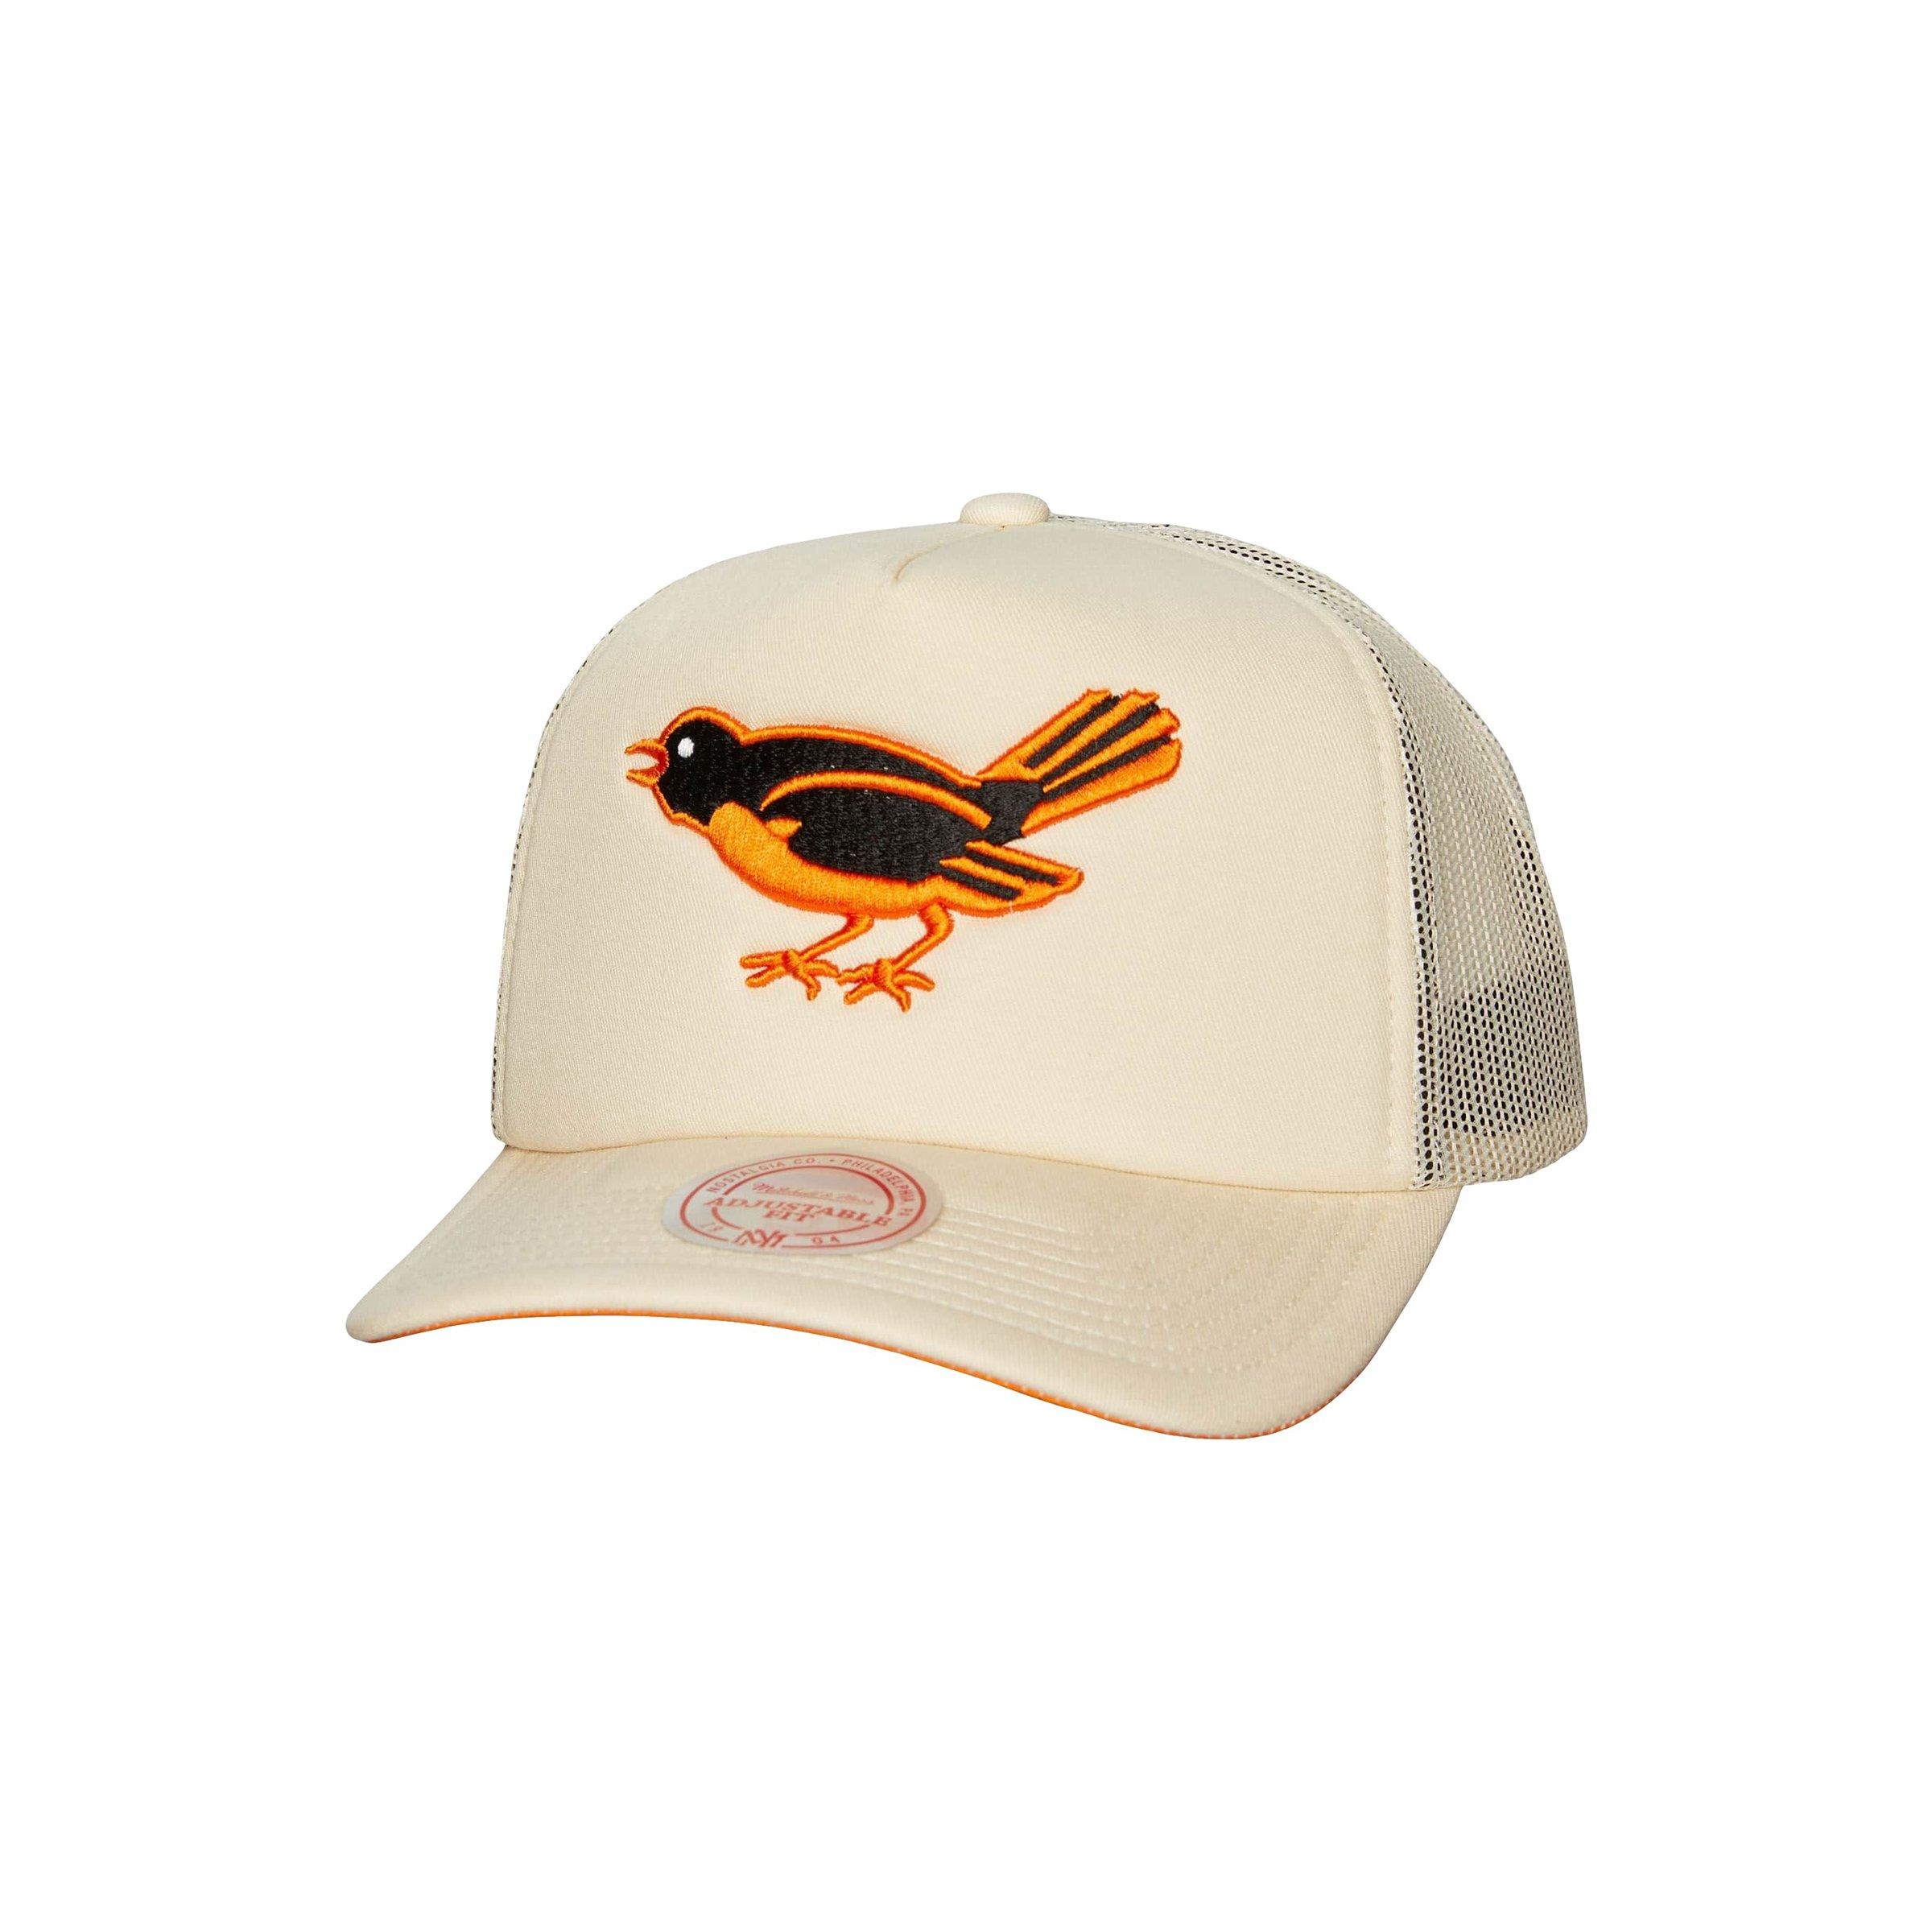 Baltimore Orioles Nike Cooperstown Collection Pro Snapback Hat - Black